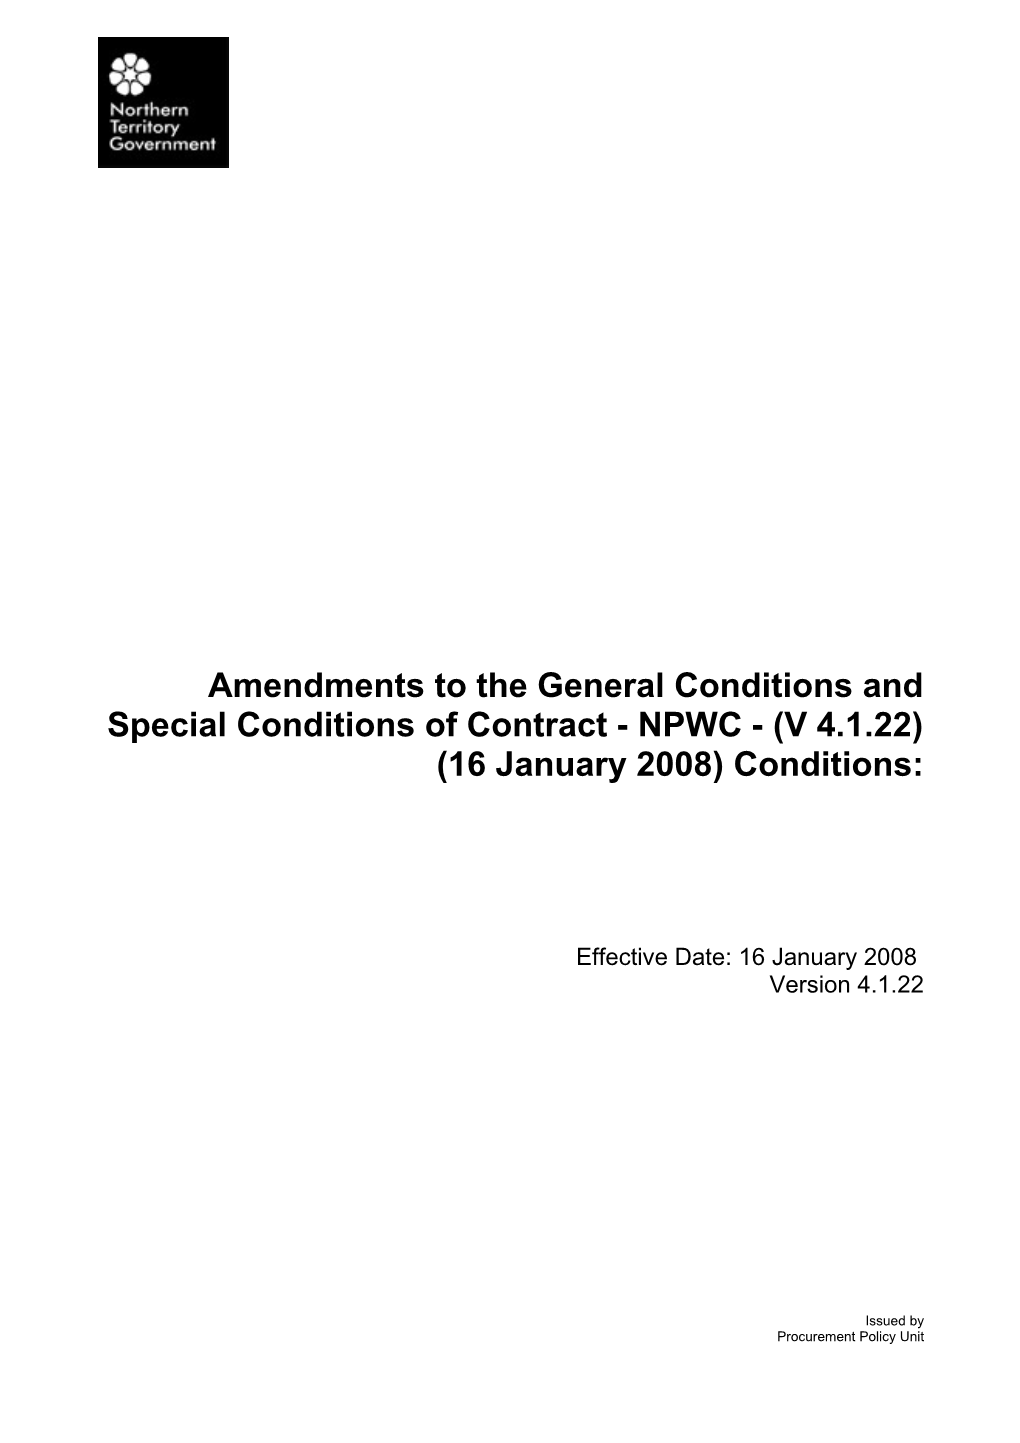 Amendments to the General Conditions and Special Conditions of Contract - NPWC - (V 4.1.22)